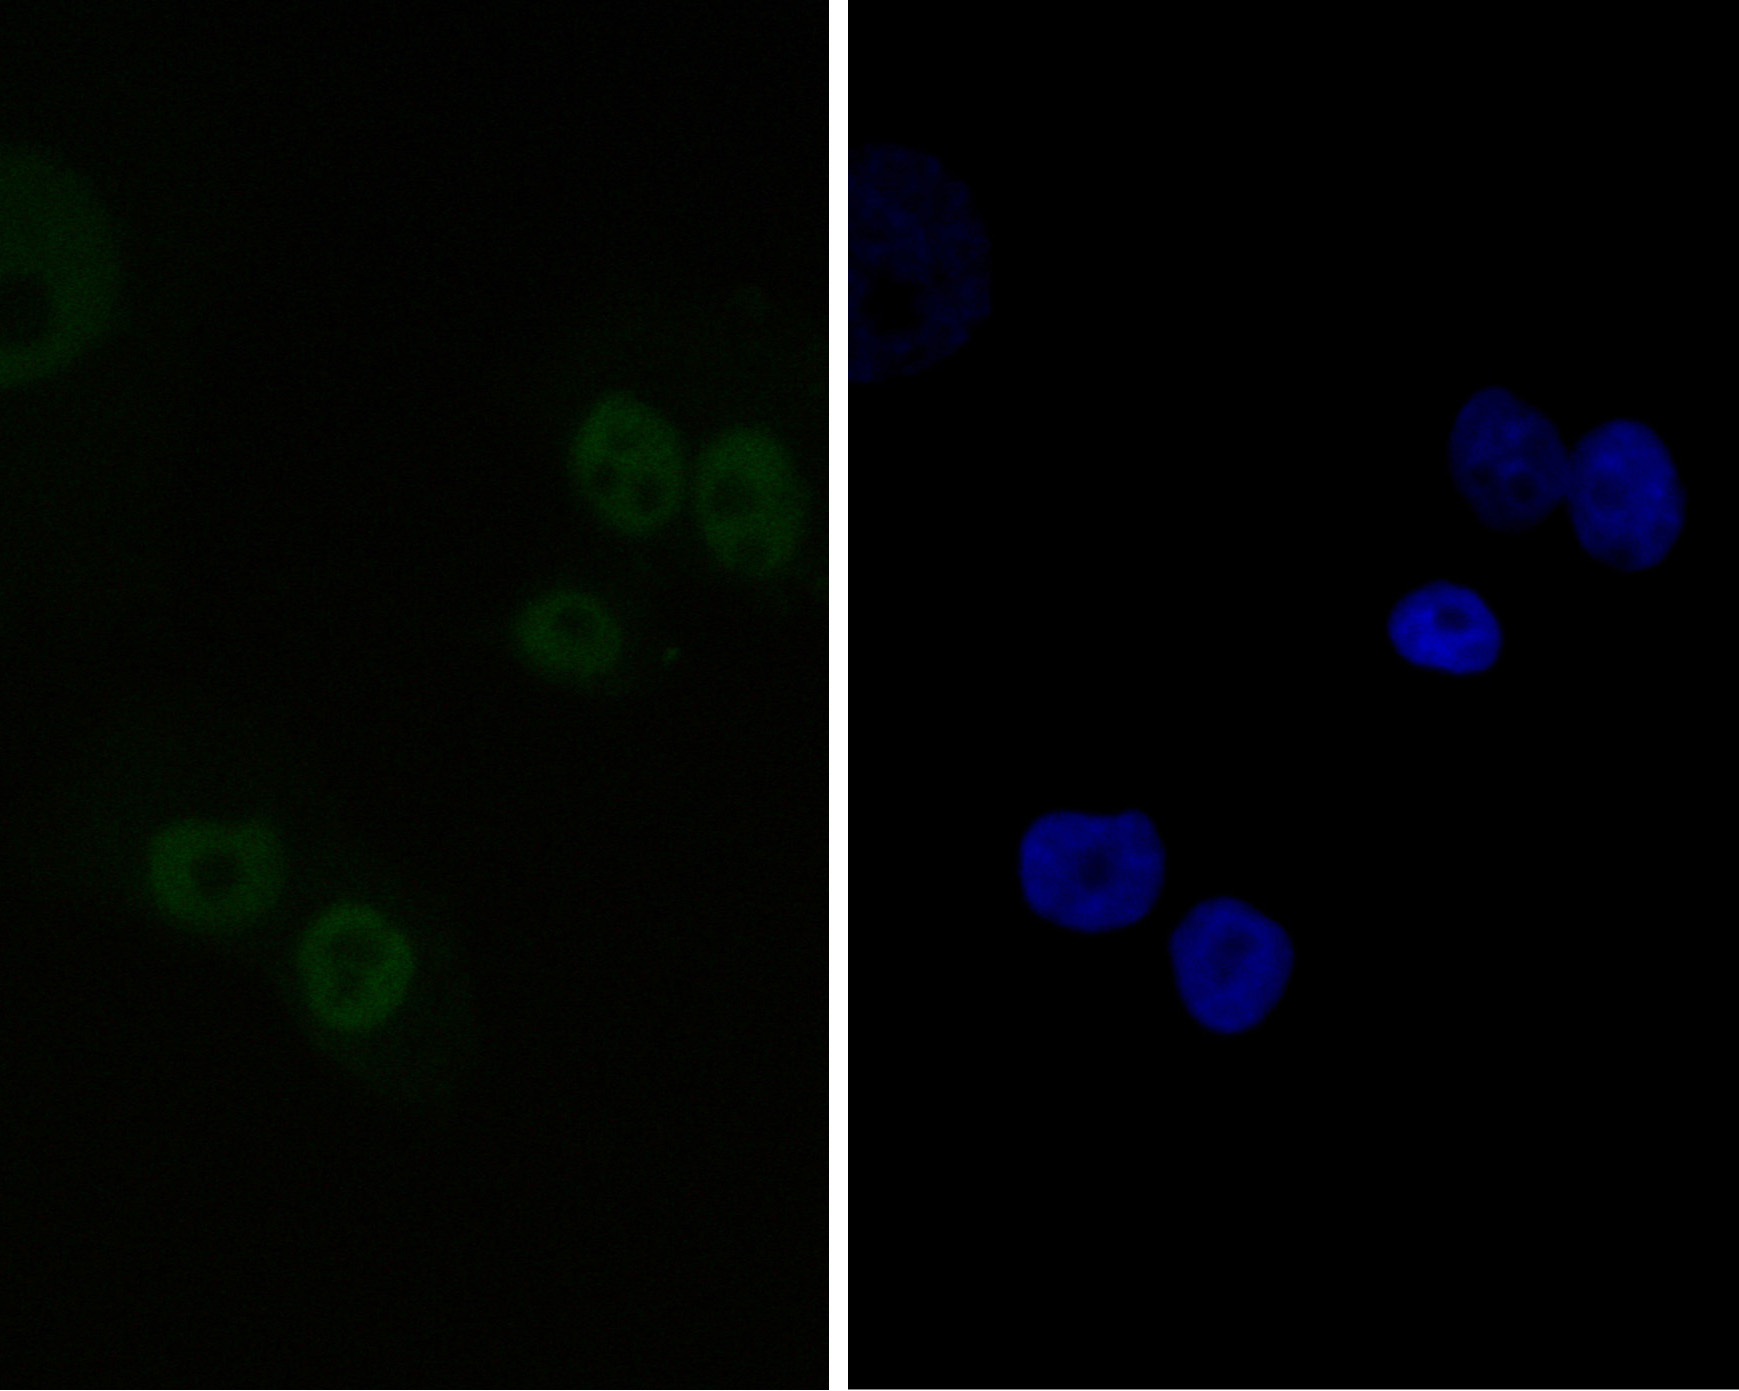 ICC staining of CTBP2 in PANC-1 cells (green). Formalin fixed cells were permeabilized with 0.1% Triton X-100 in TBS for 10 minutes at room temperature and blocked with 1% Blocker BSA for 15 minutes at room temperature. Cells were probed with the primary antibody (ET7111-27, 1/50) for 1 hour at room temperature, washed with PBS. Alexa Fluor®488 Goat anti-Rabbit IgG was used as the secondary antibody at 1/1,000 dilution. The nuclear counter stain is DAPI (blue).